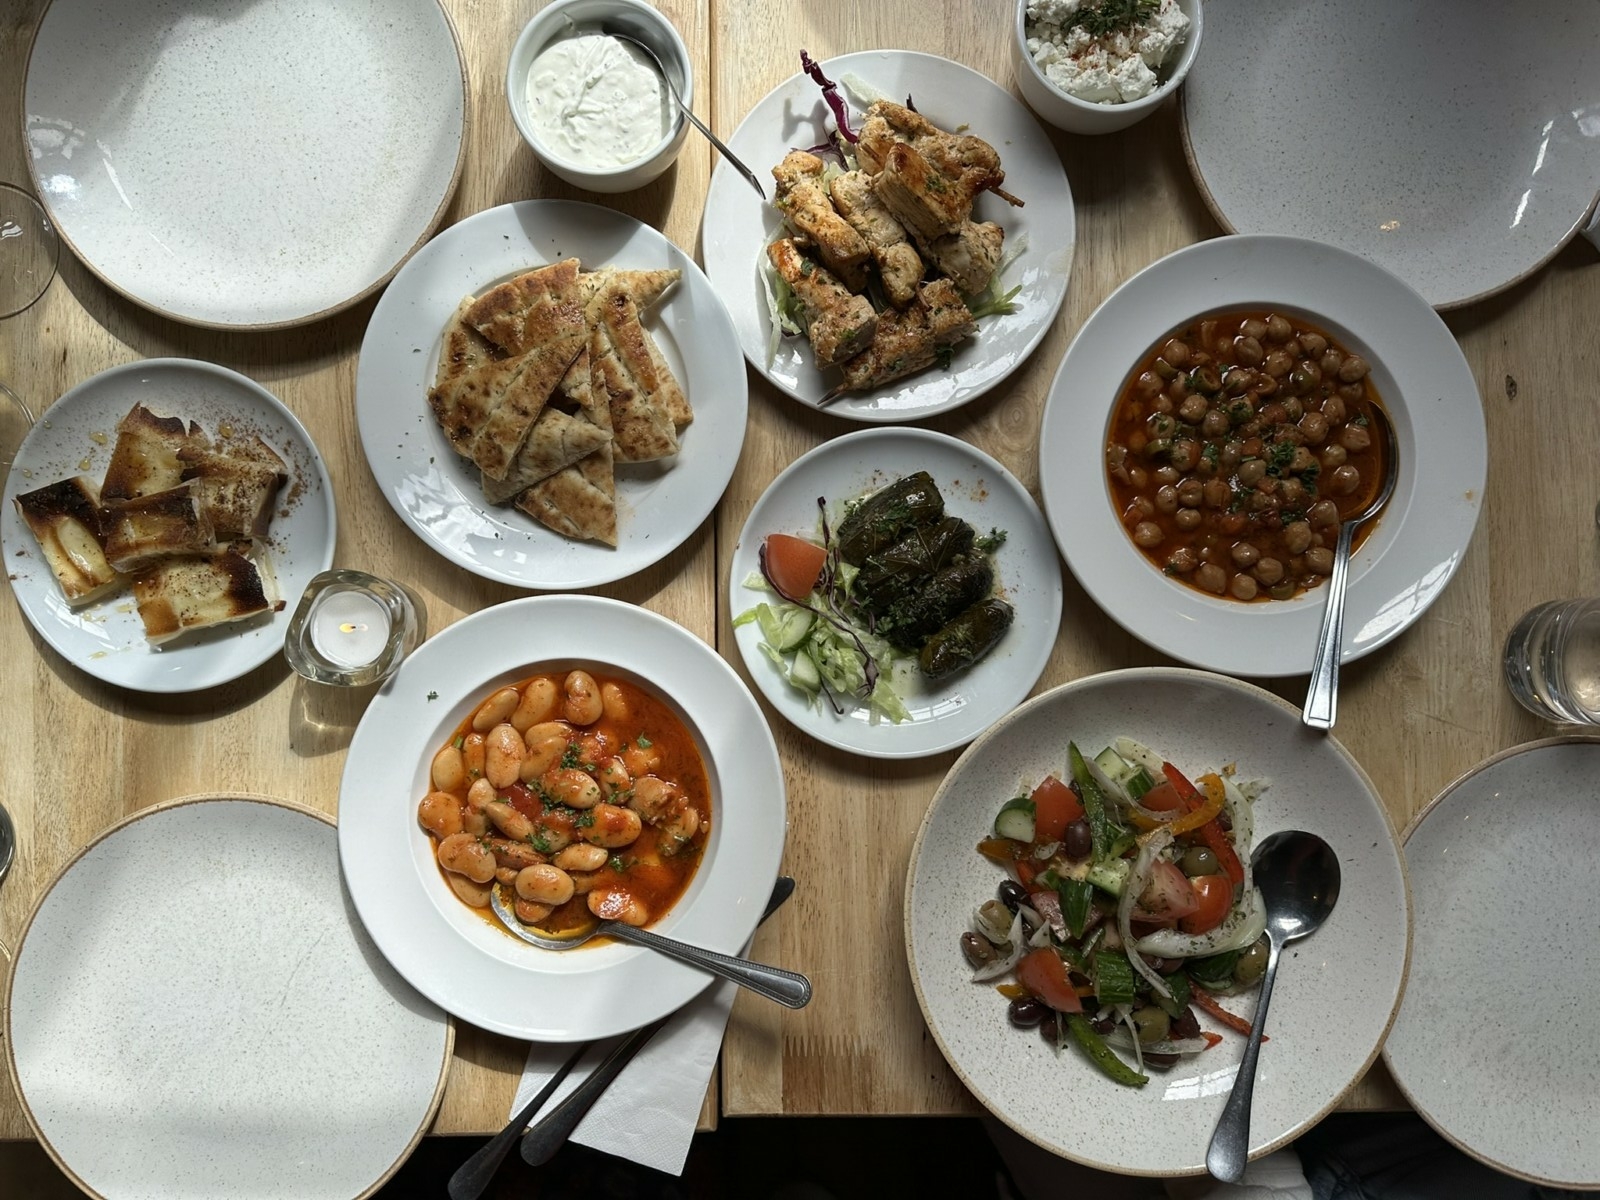 Places to eat in Leeds - a Mezze of Greek food